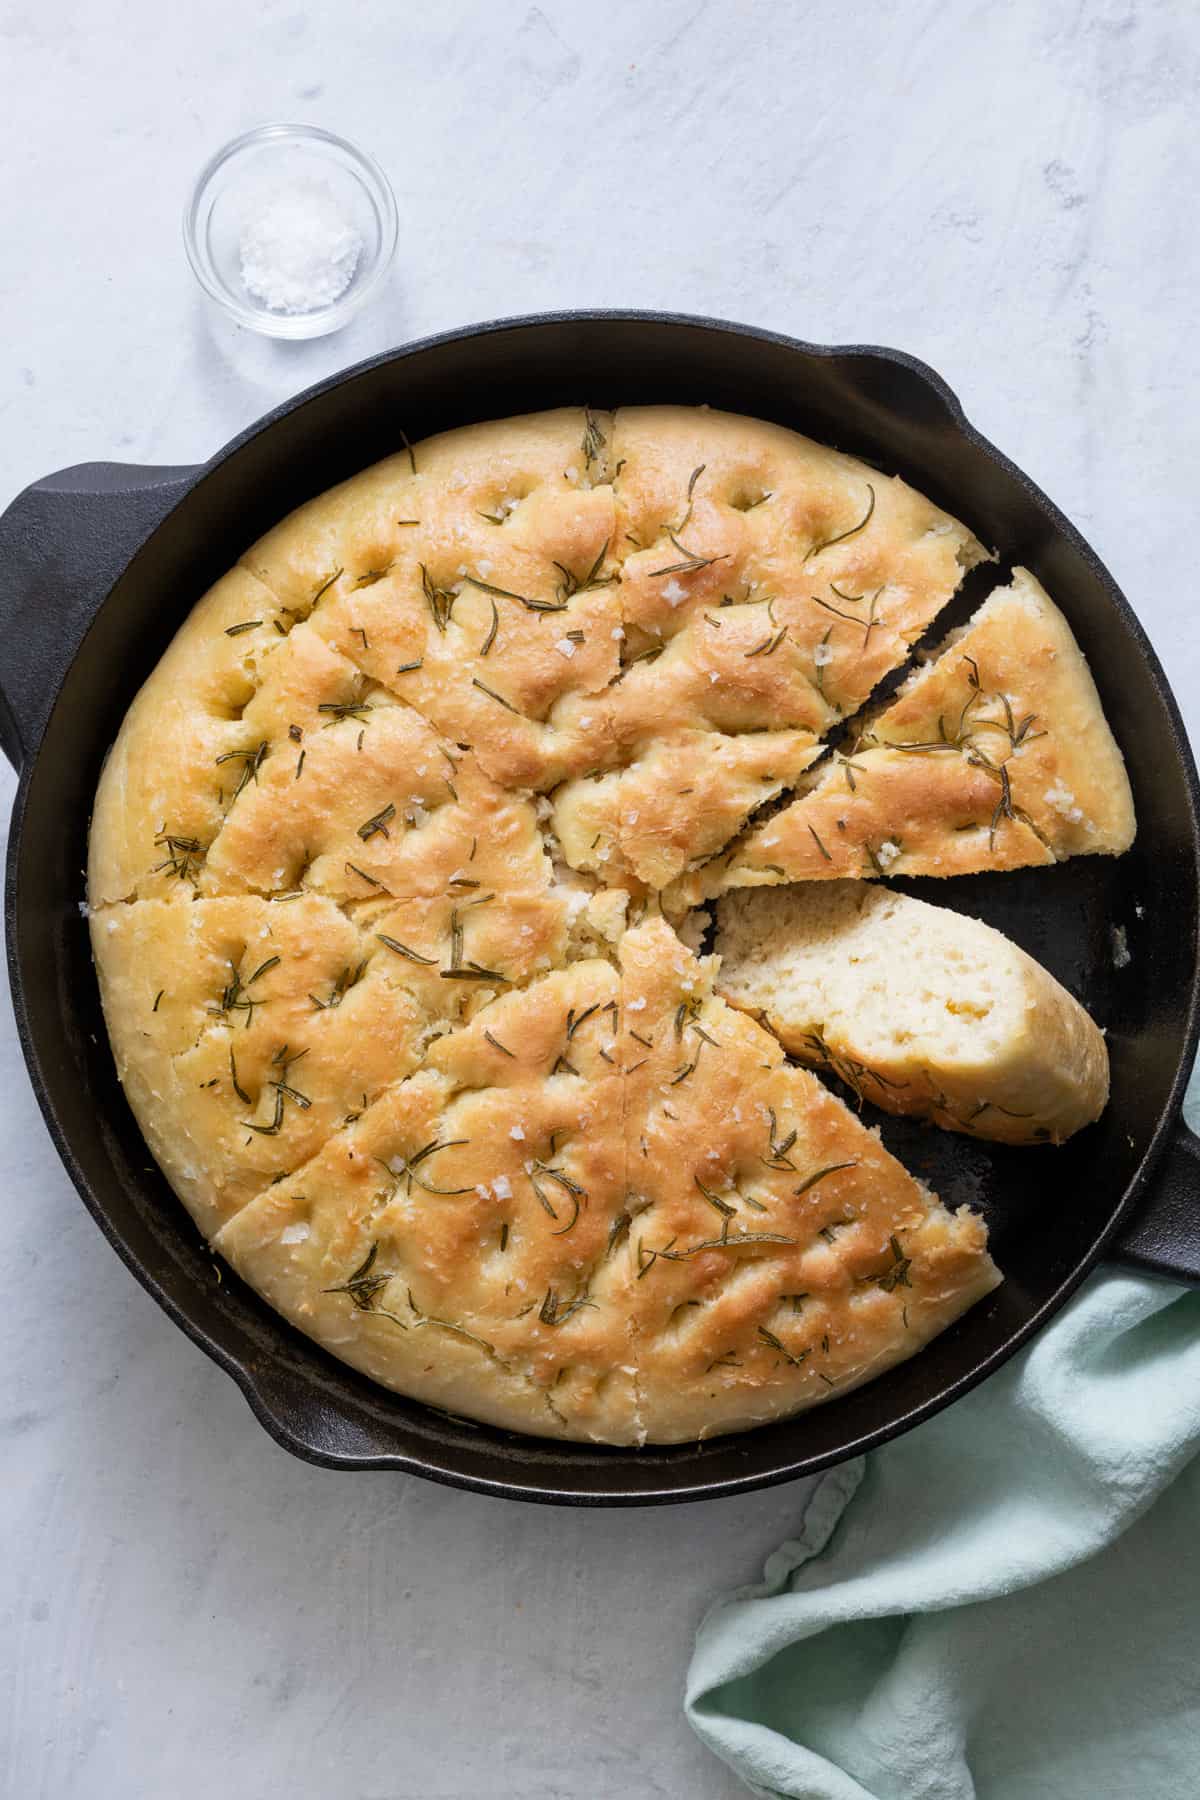 Focaccia in skillet cut into 8 slices with one slice flipped over to show texture.